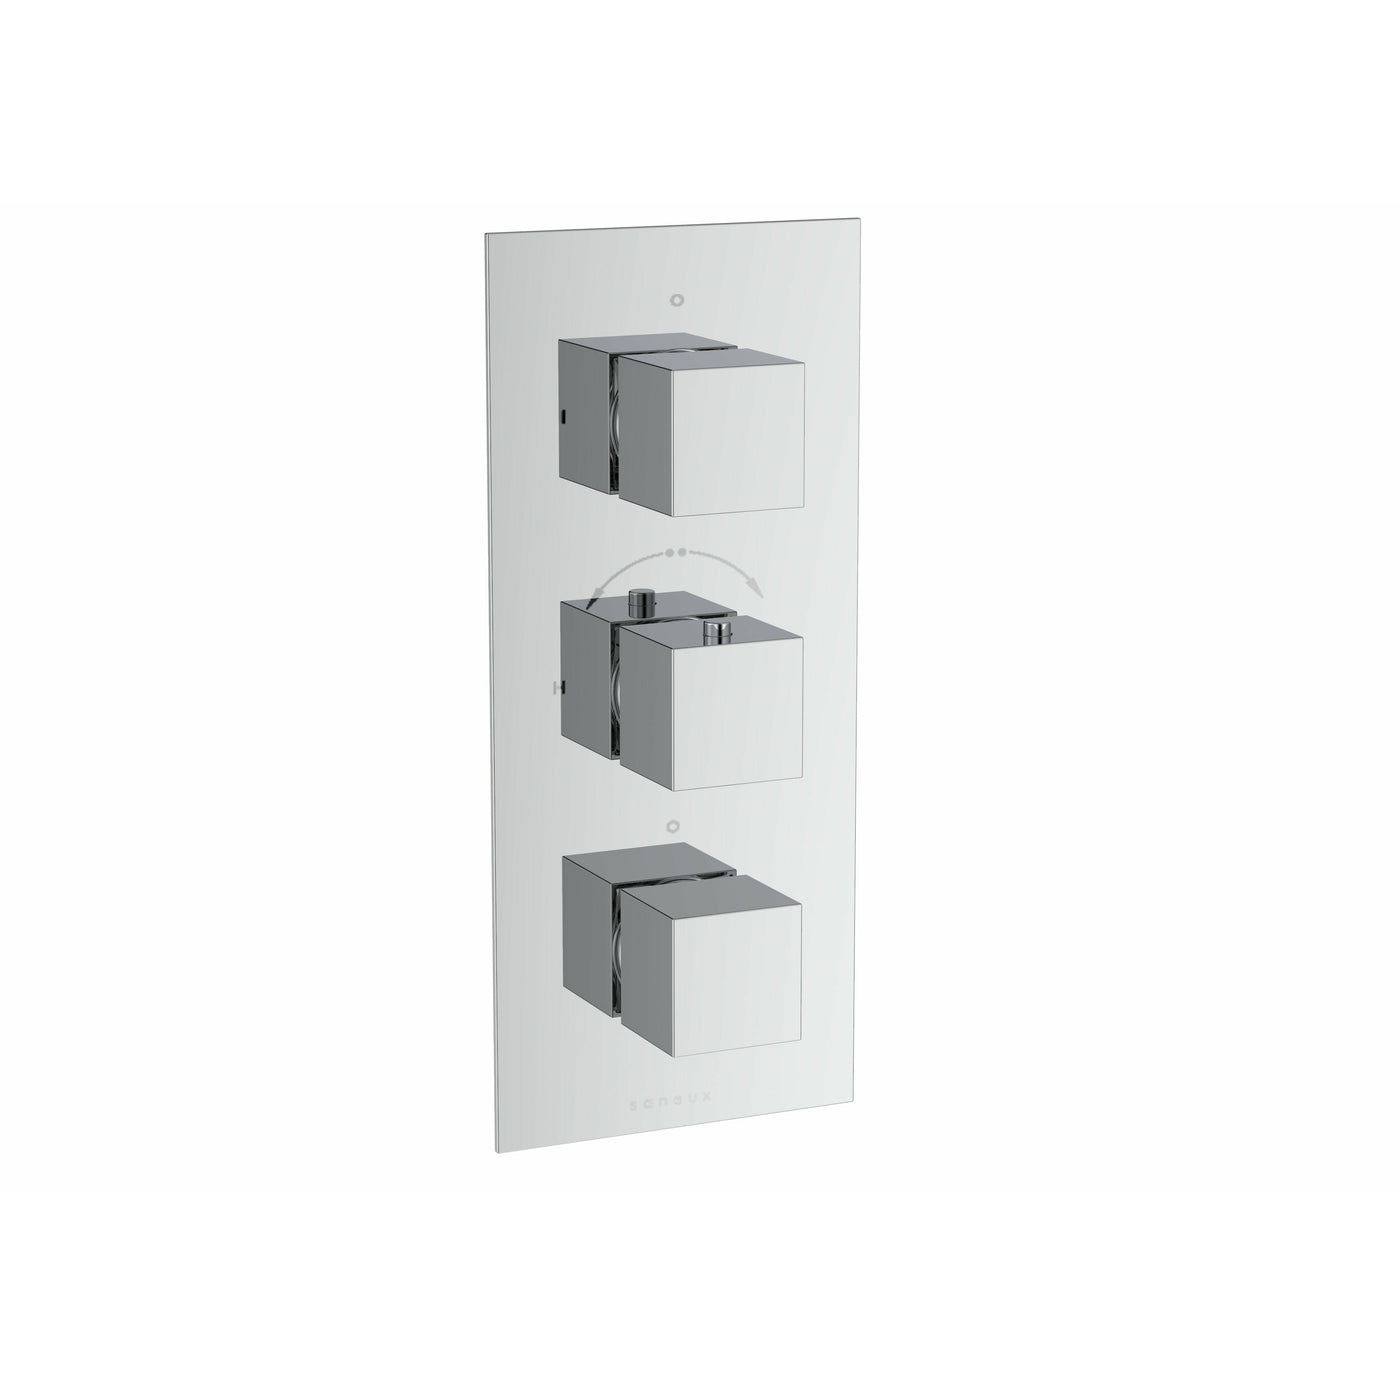 Saneux Chrome 3 hole 3 outlets thermostatic valve handle with plate, Square - Letta London - Thermostatic Showers